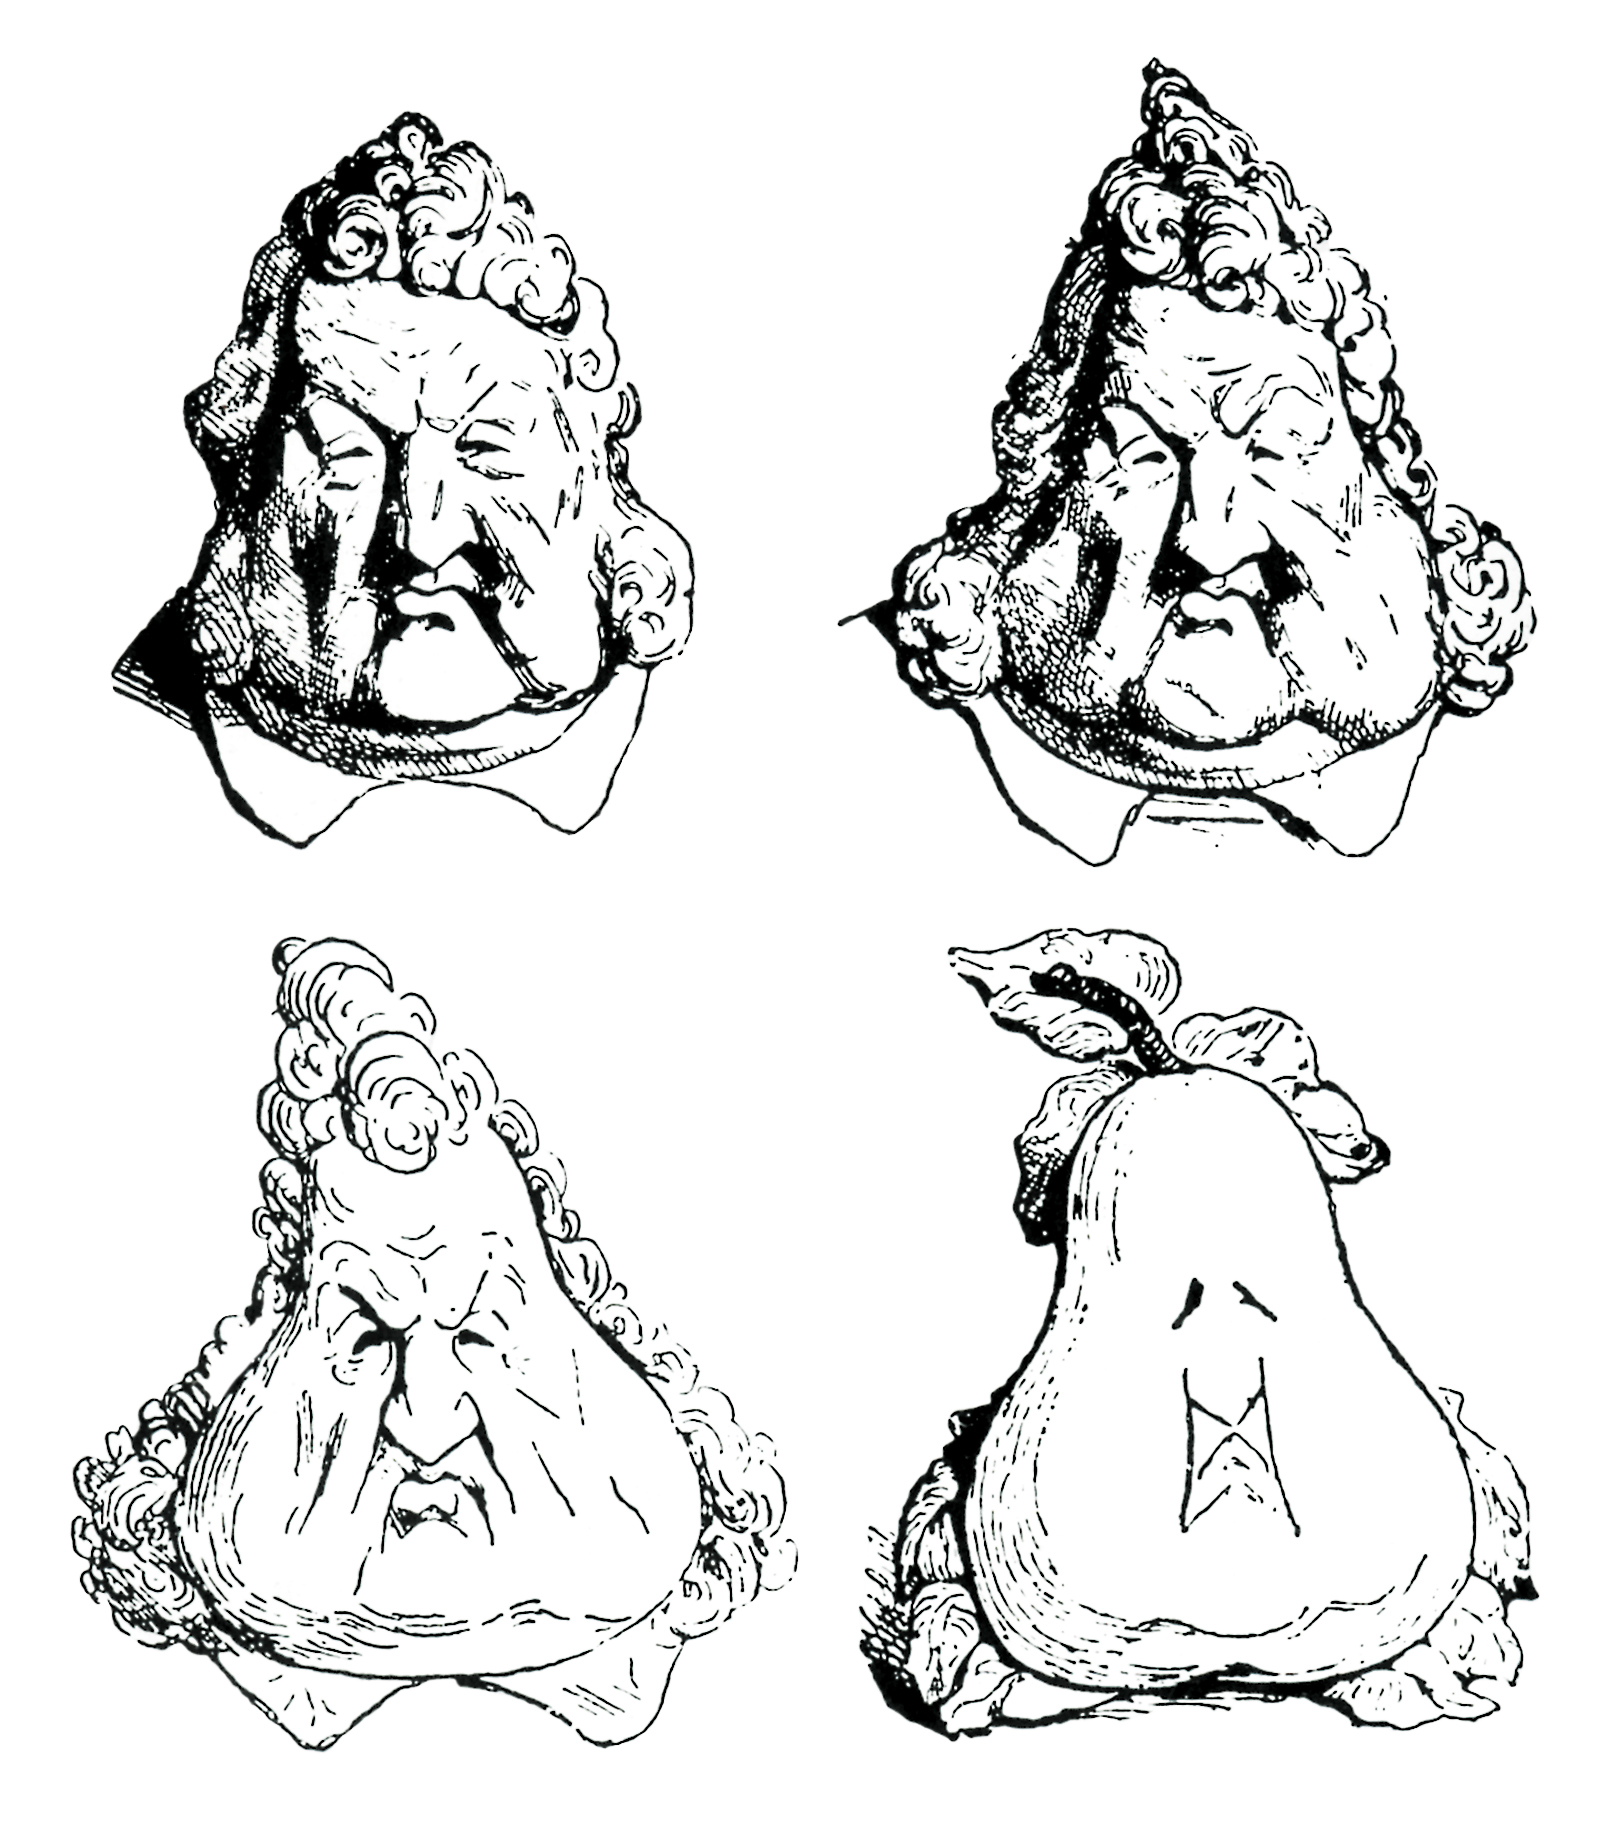 A series of caricatures from the 1830s depicting the gradual transformation of King Louis-Philippe’s face into a pear. 